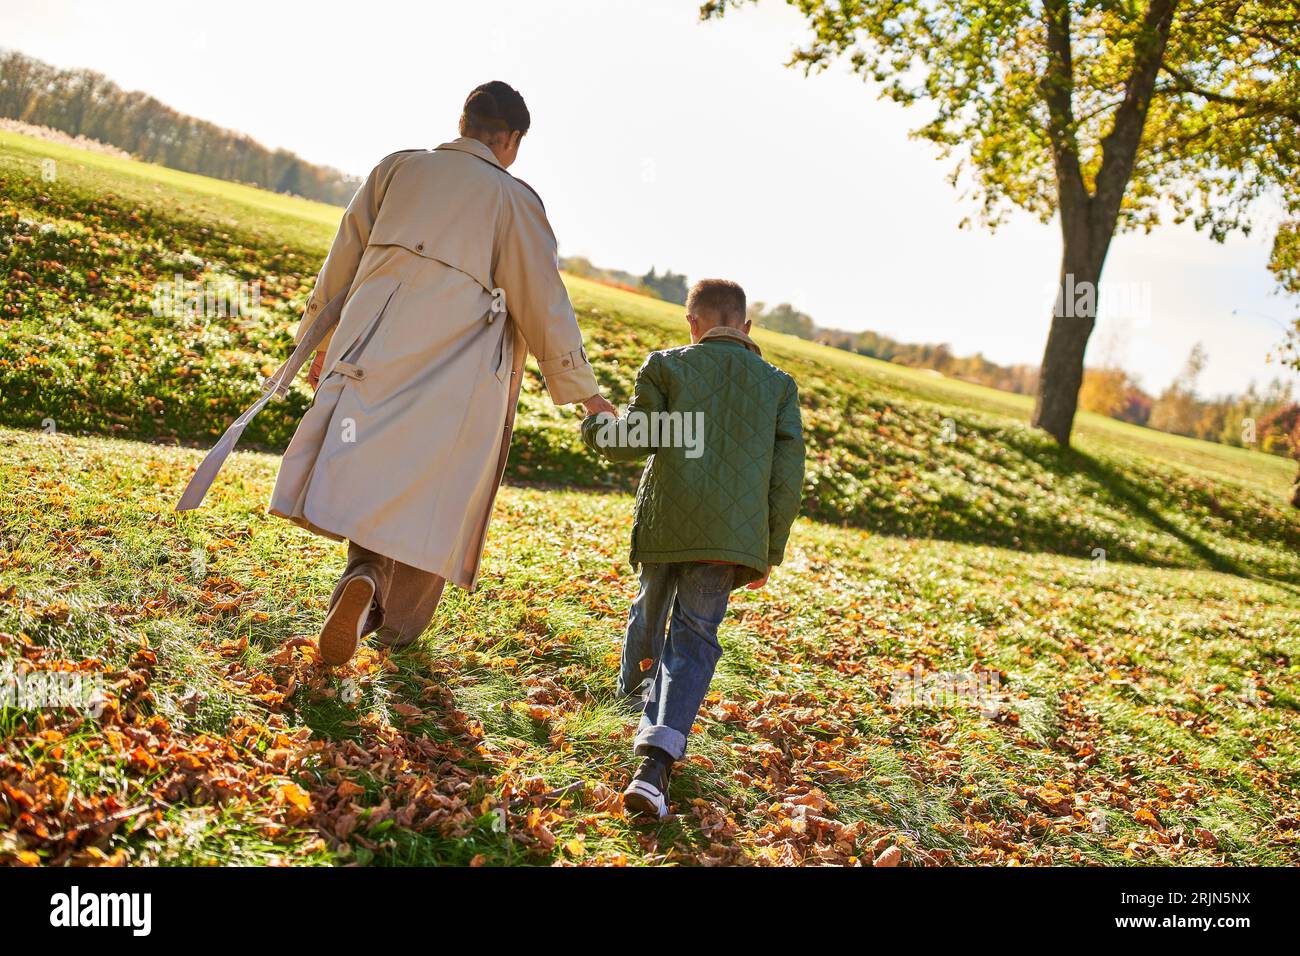 golden hour, mother and son walking in park, hold hands, autumn leaves, fall, african american Stock Photo